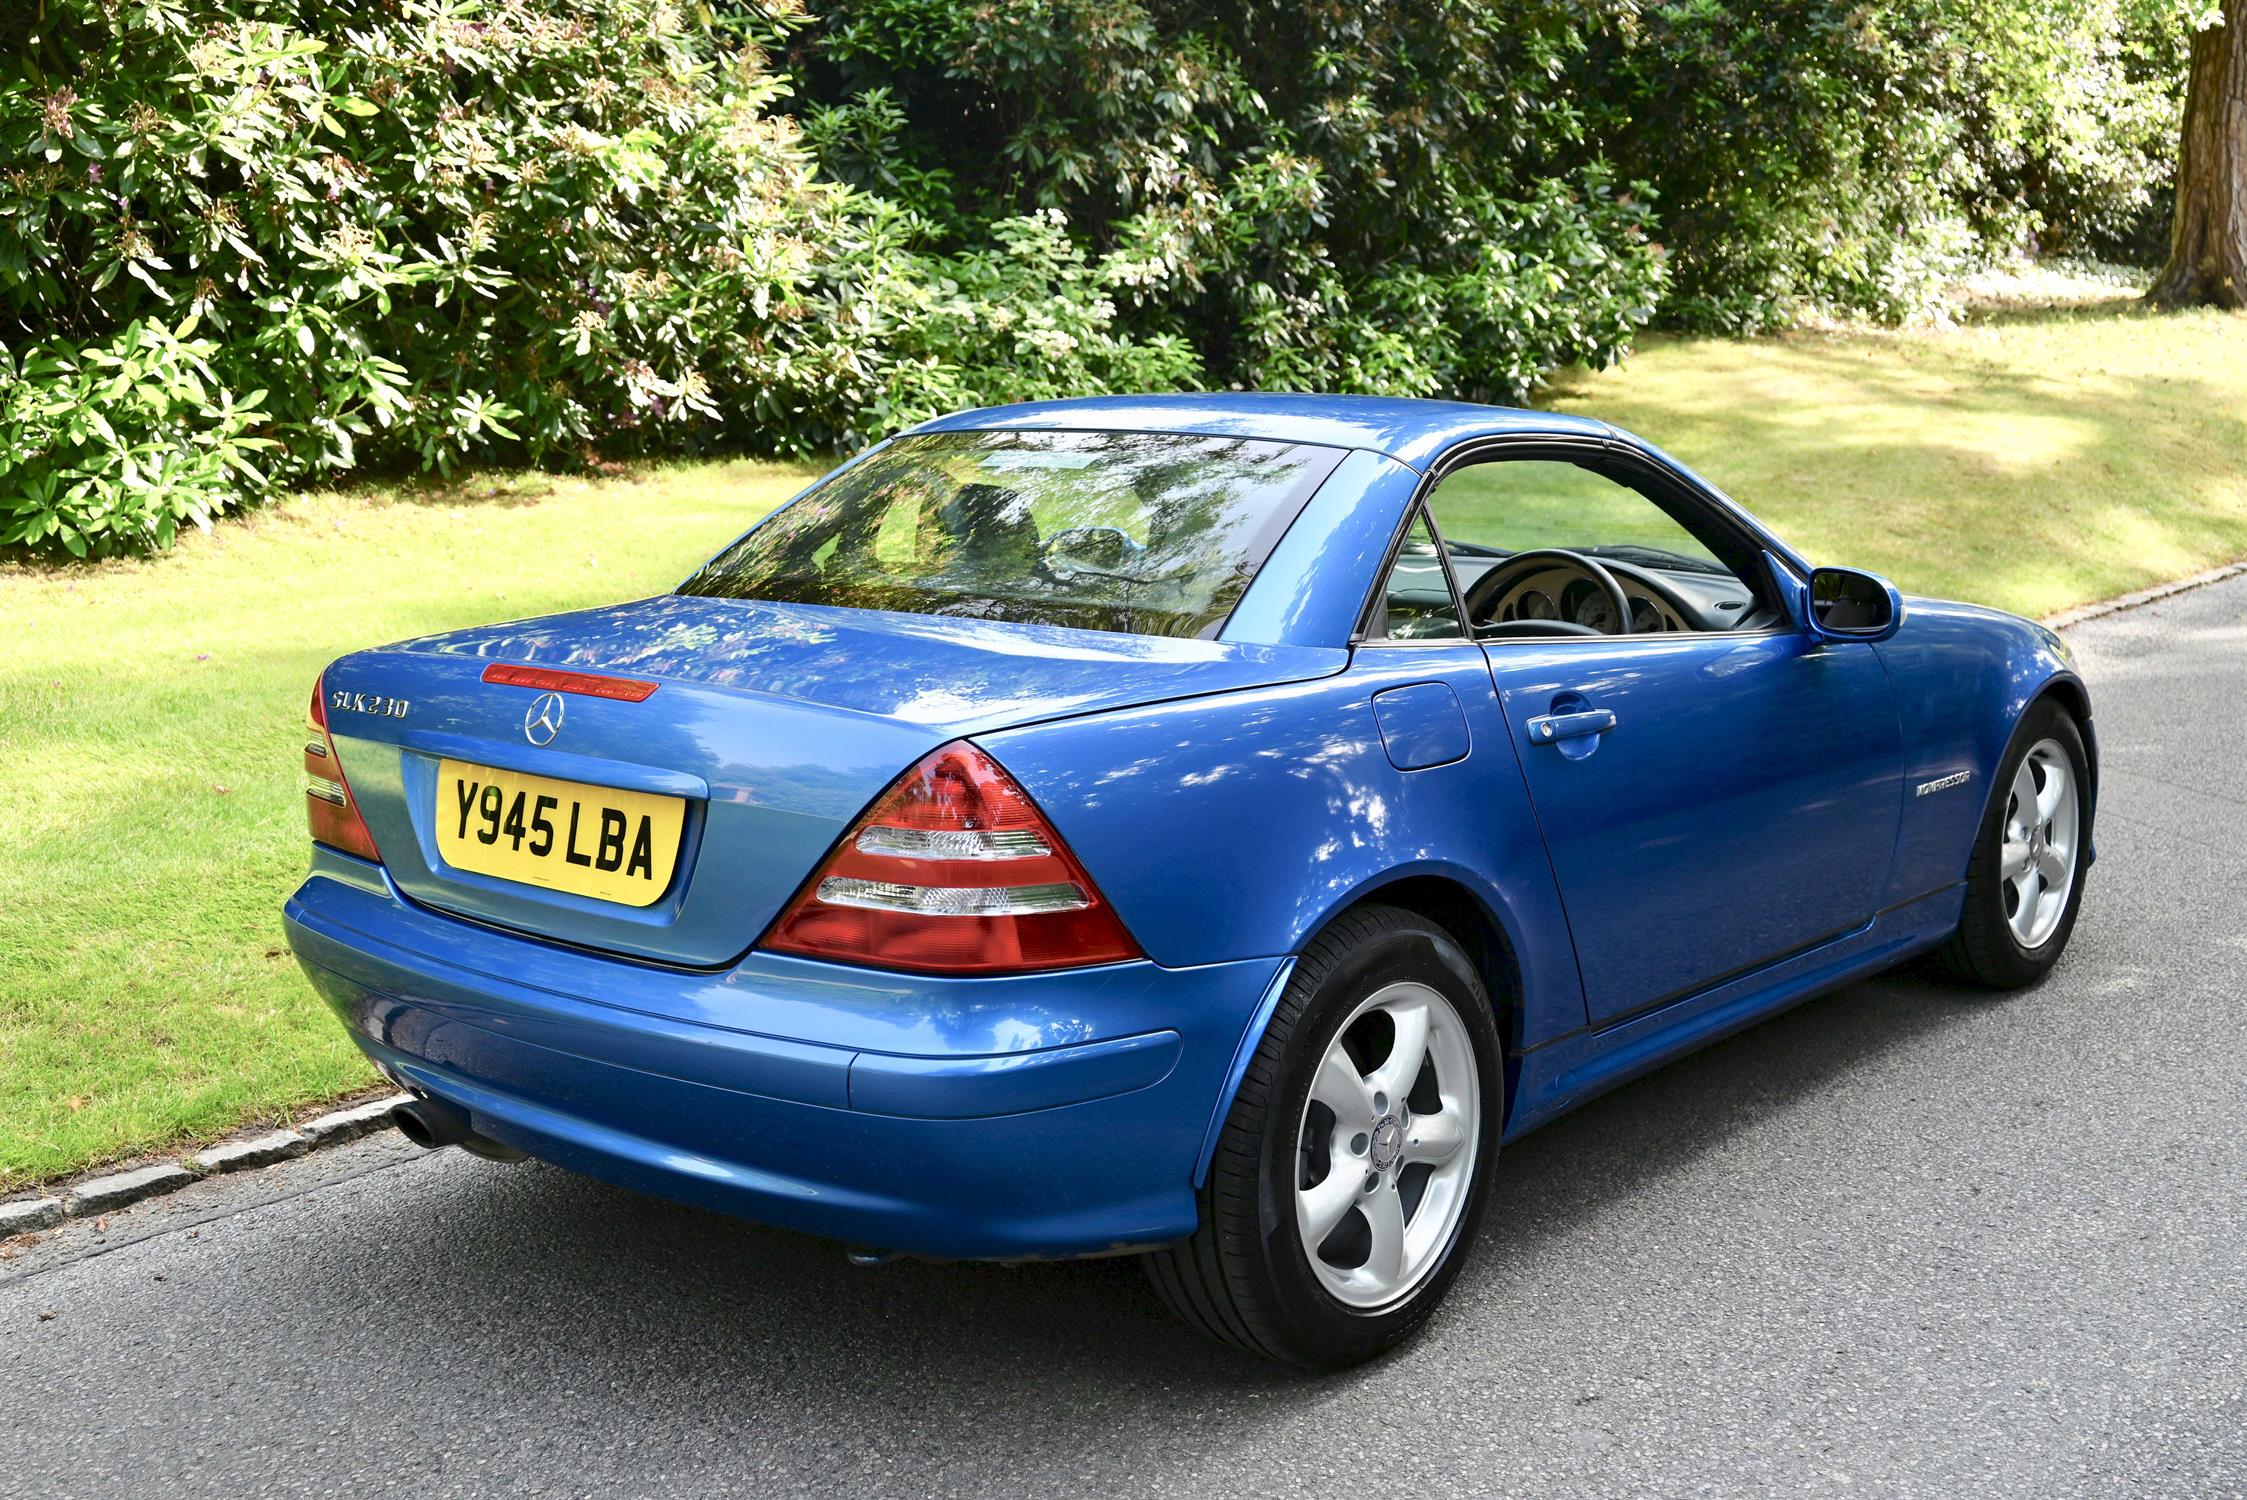 Mercedes Benz 230 SLK Convertible Auto Electric Blue coachwork with duo-tone black/beige leather - Image 7 of 15